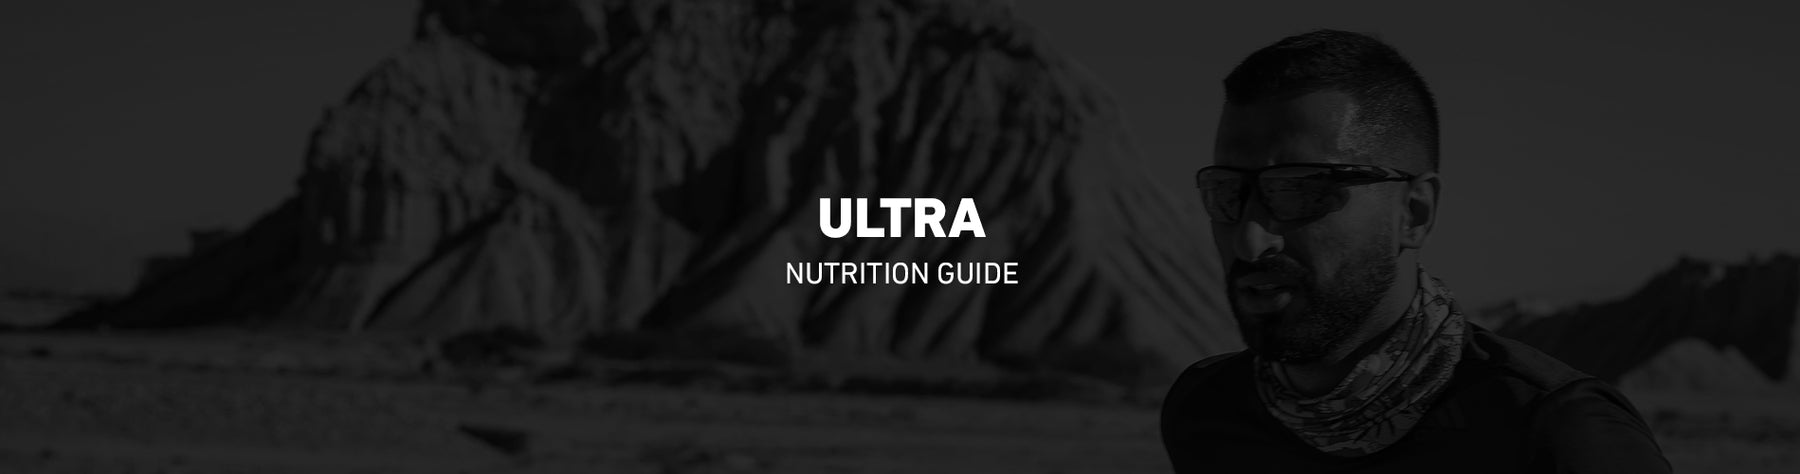 Nutrition Guide - Ultra